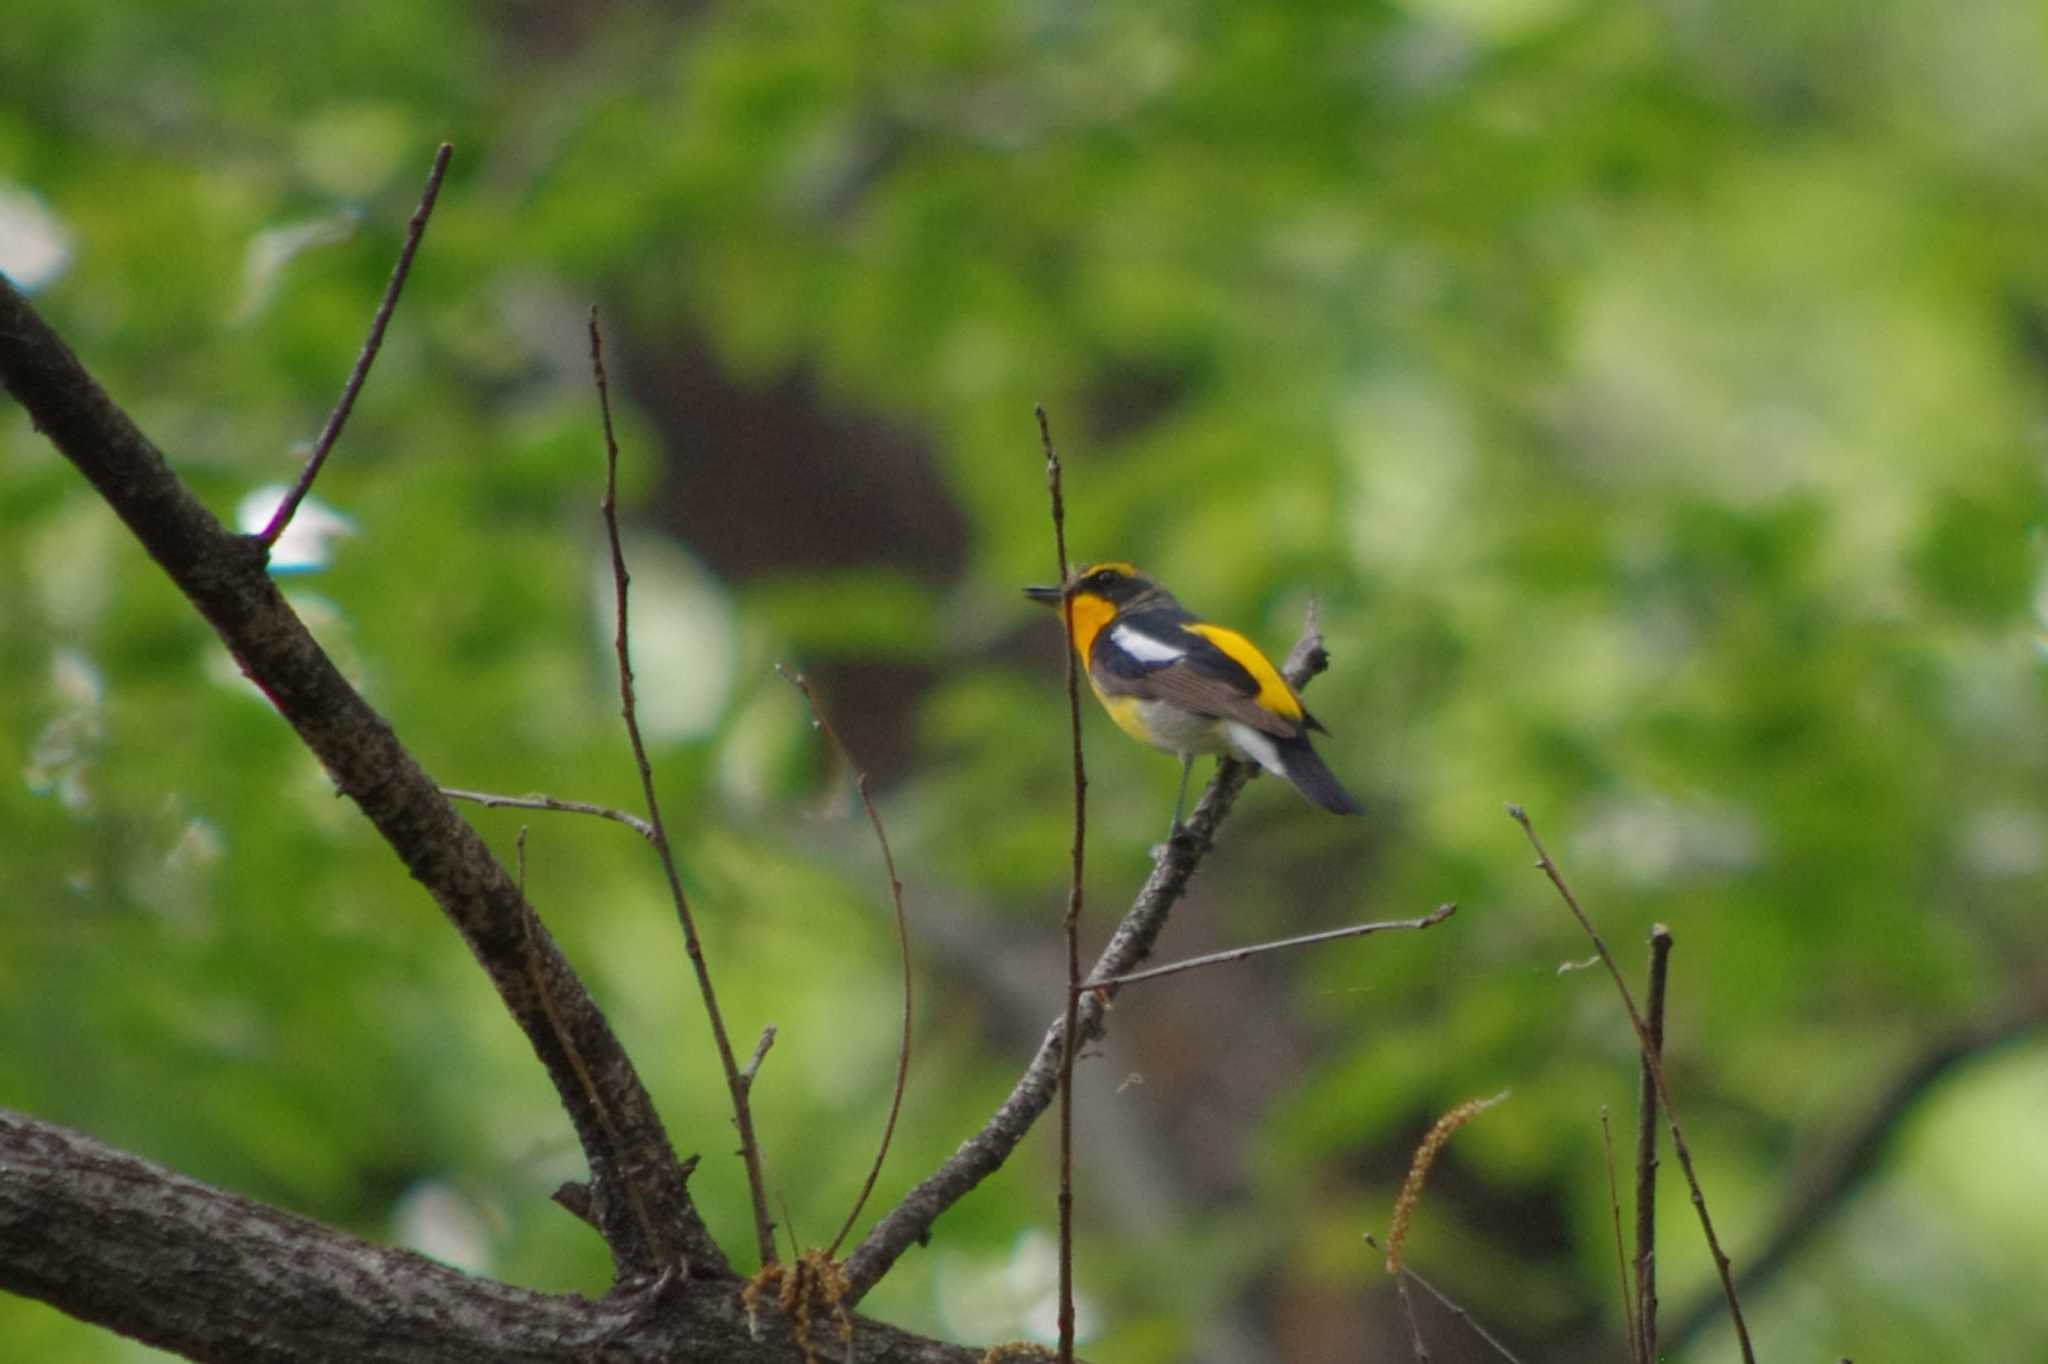 Photo of Narcissus Flycatcher at ぐんま昆虫の森(群馬県桐生市) by アカウント15604